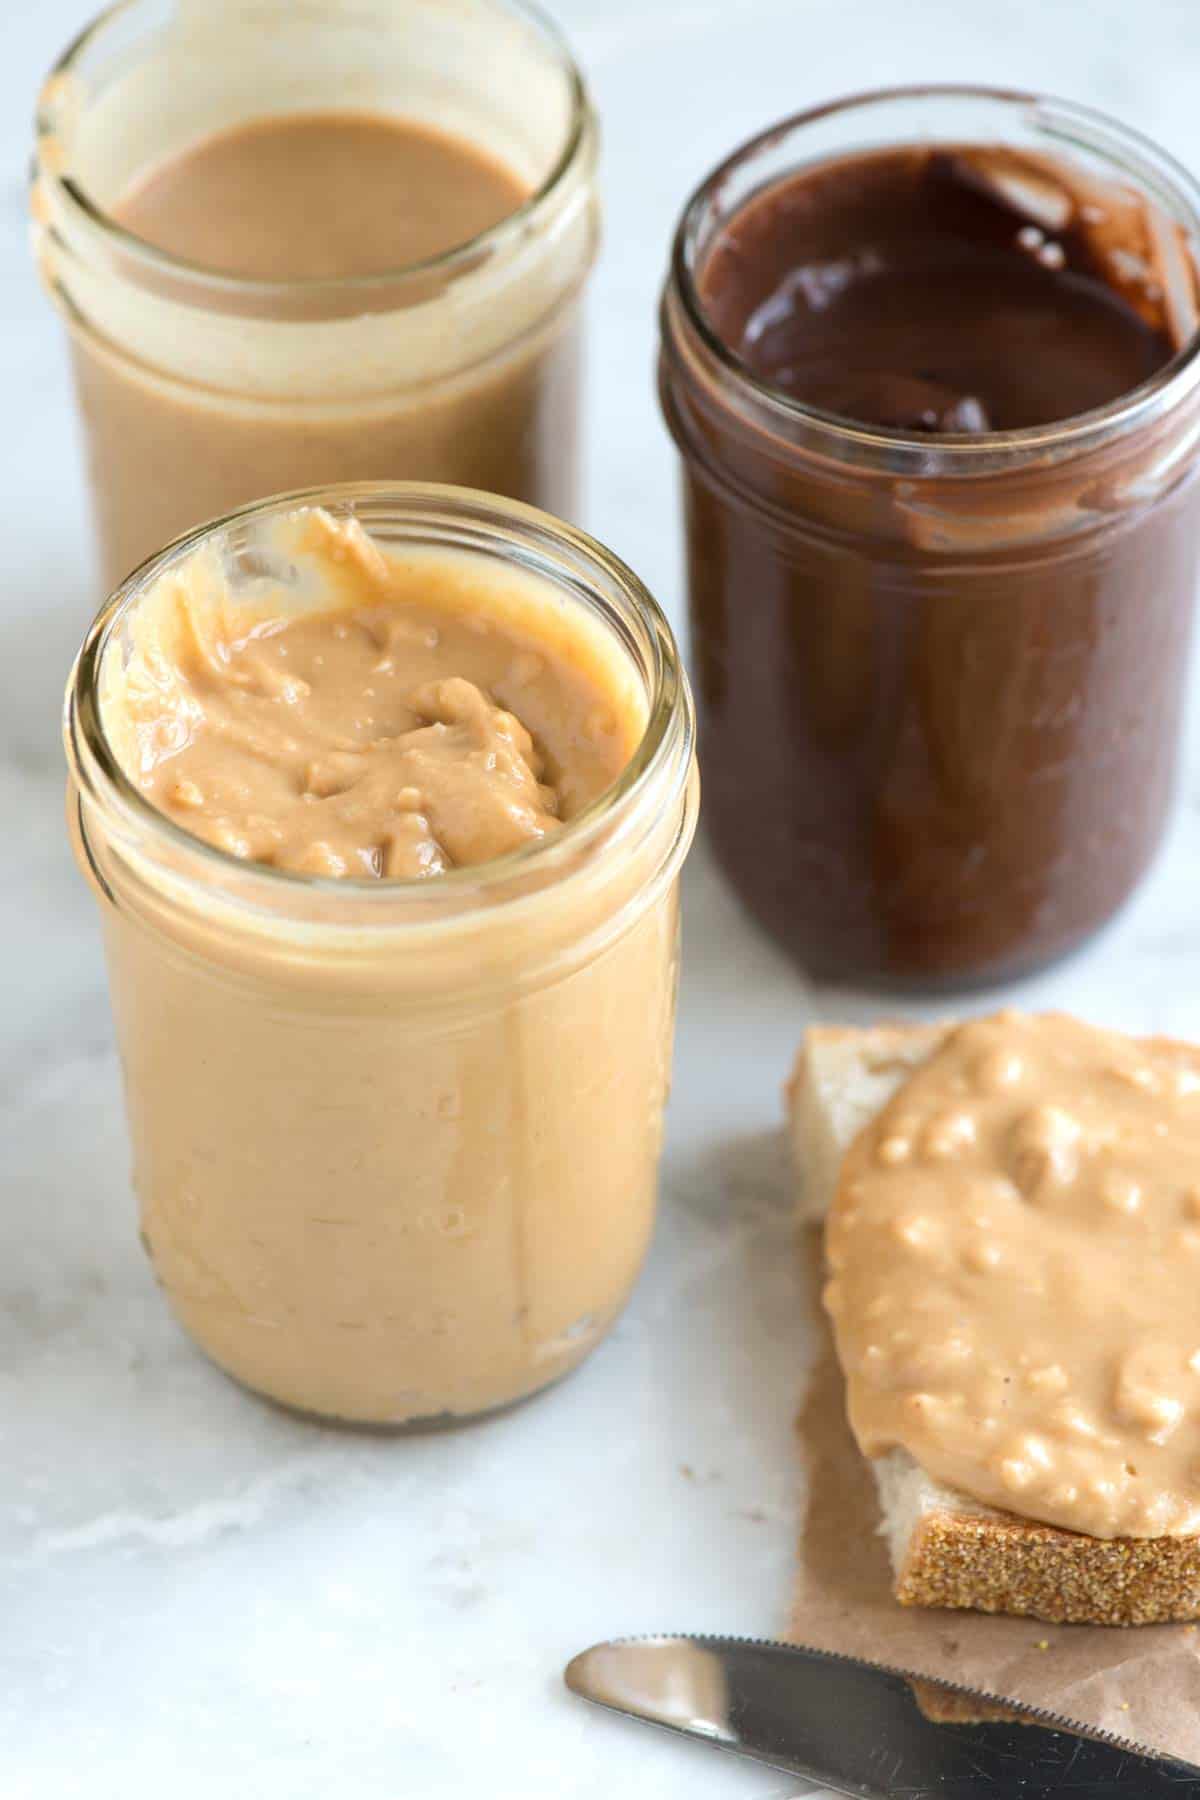 The Best Homemade Peanut Butter (With Variations)